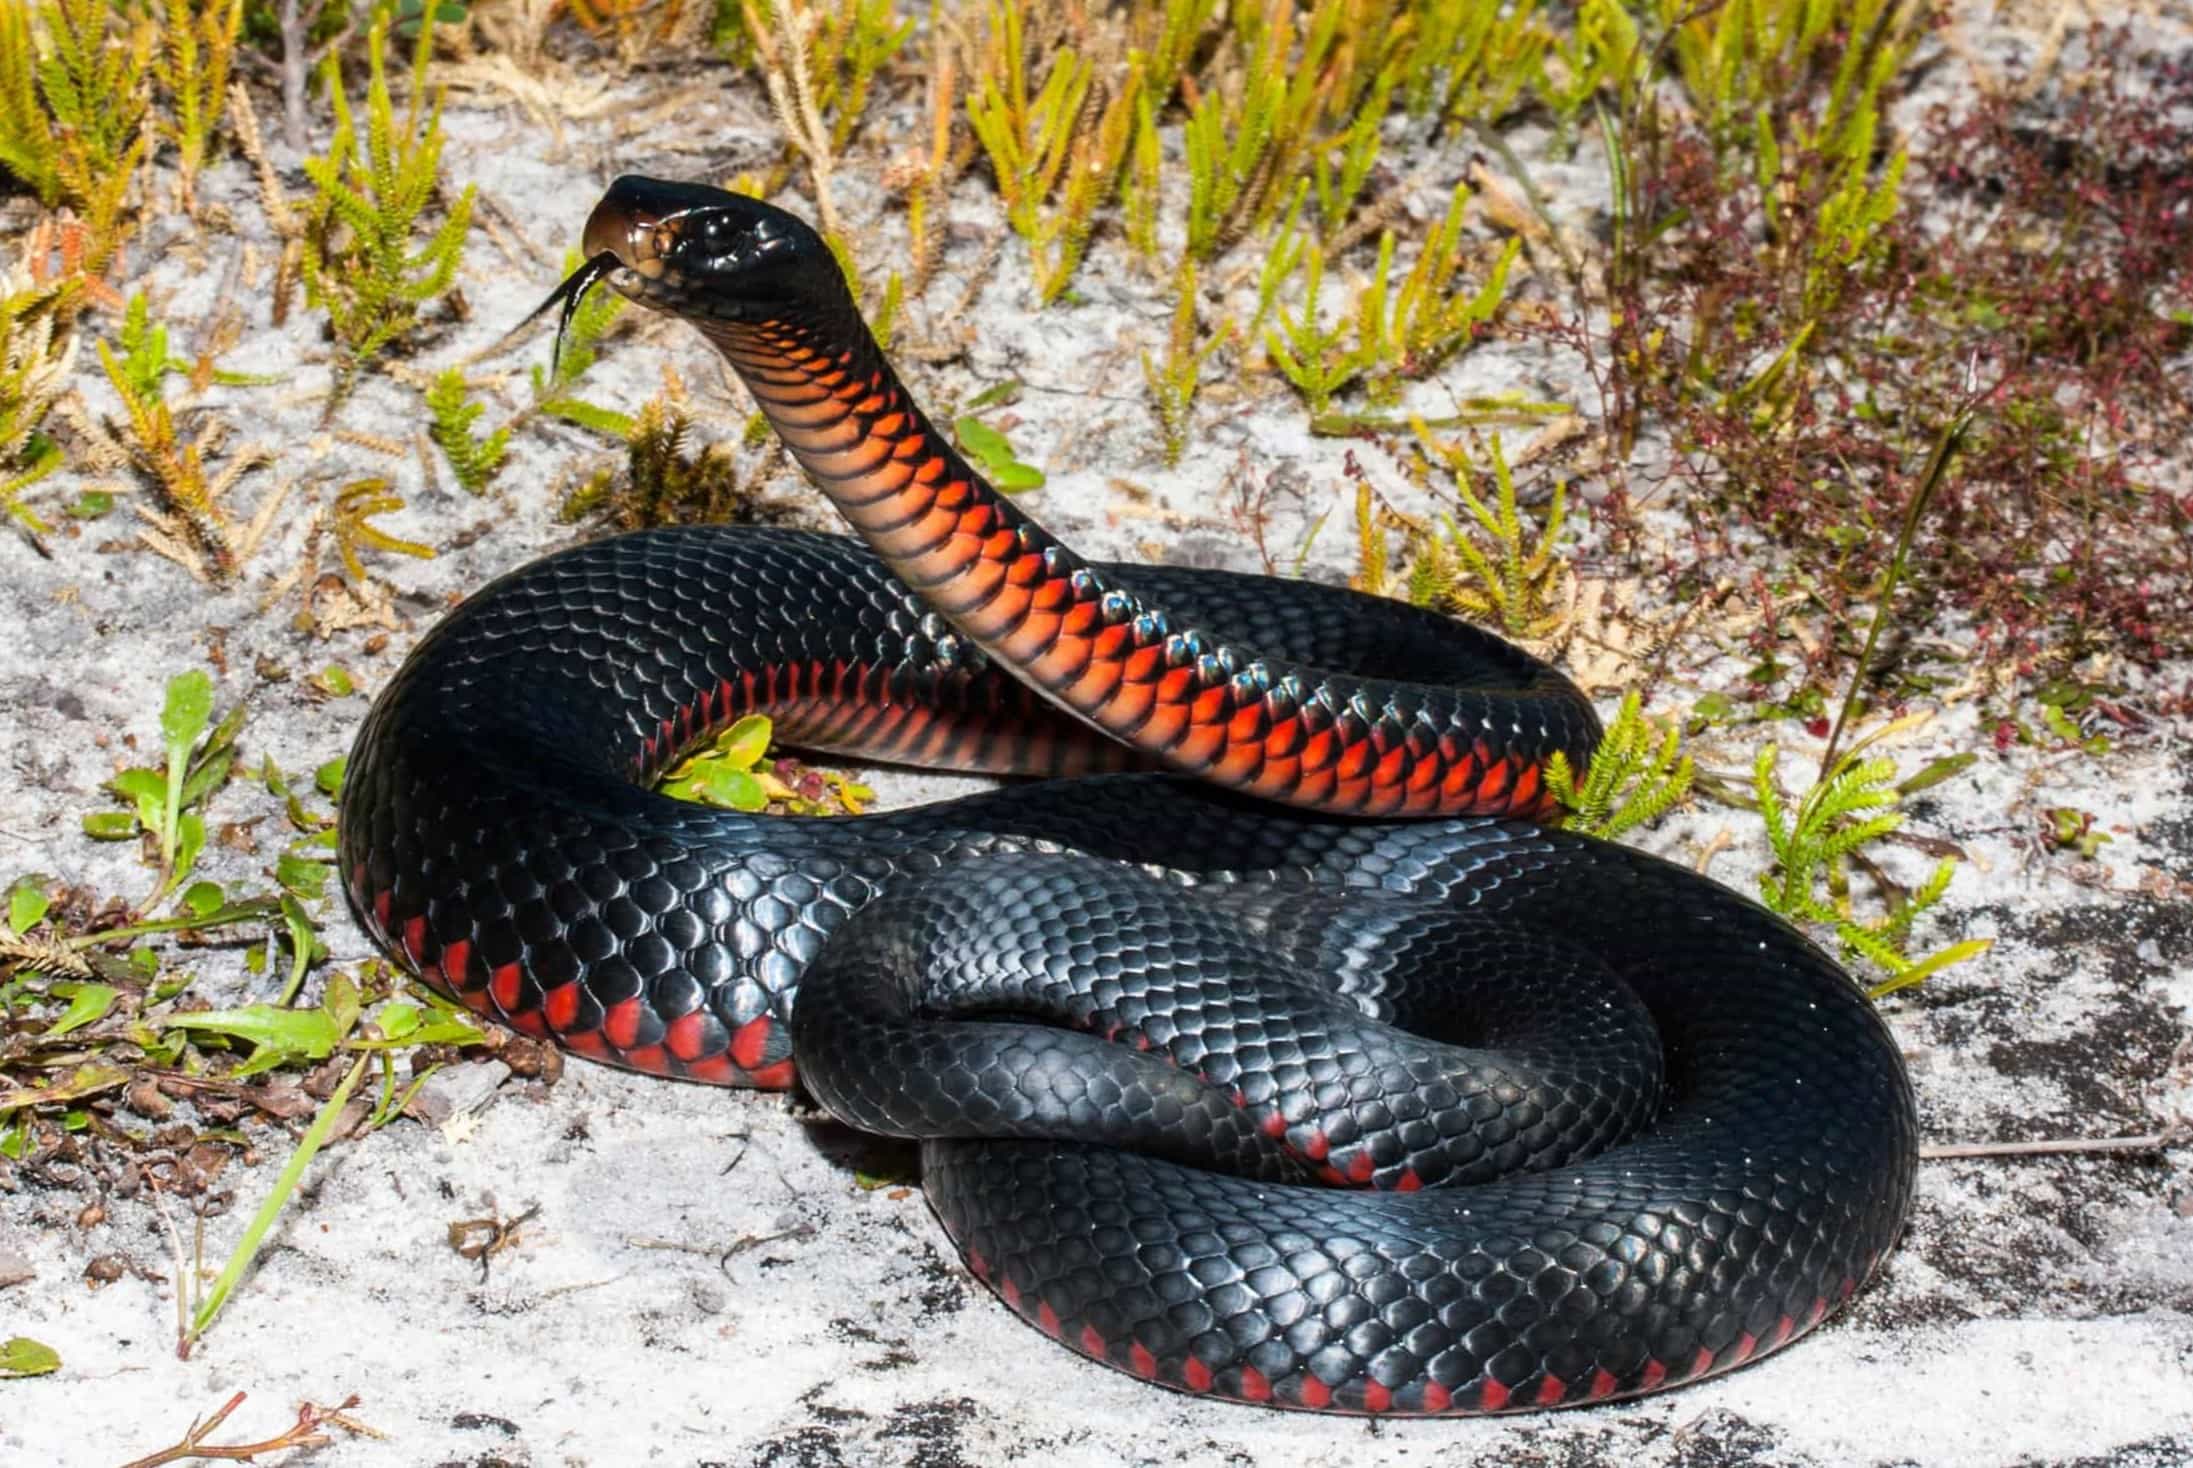 15-astonishing-facts-about-red-bellied-black-snake